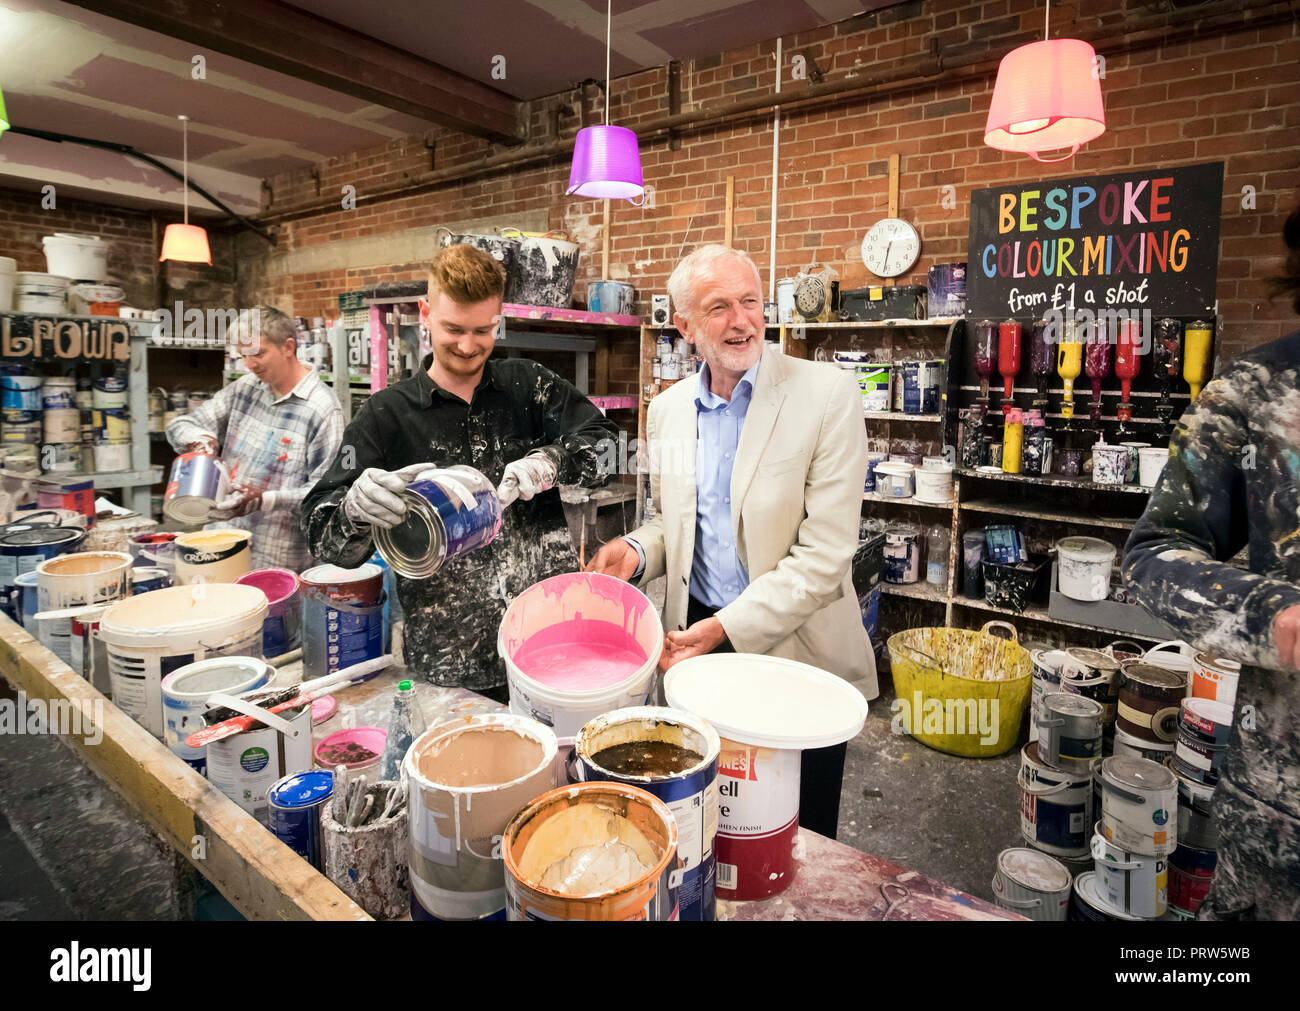 Labour leader Jeremy Corbyn during a visit to Seagulls Reuse in Leeds, which was damaged during the Boxing Day floods in 2015, as he supported the city's bid for more funding for flood defences to prevent any future disasters. Stock Photo